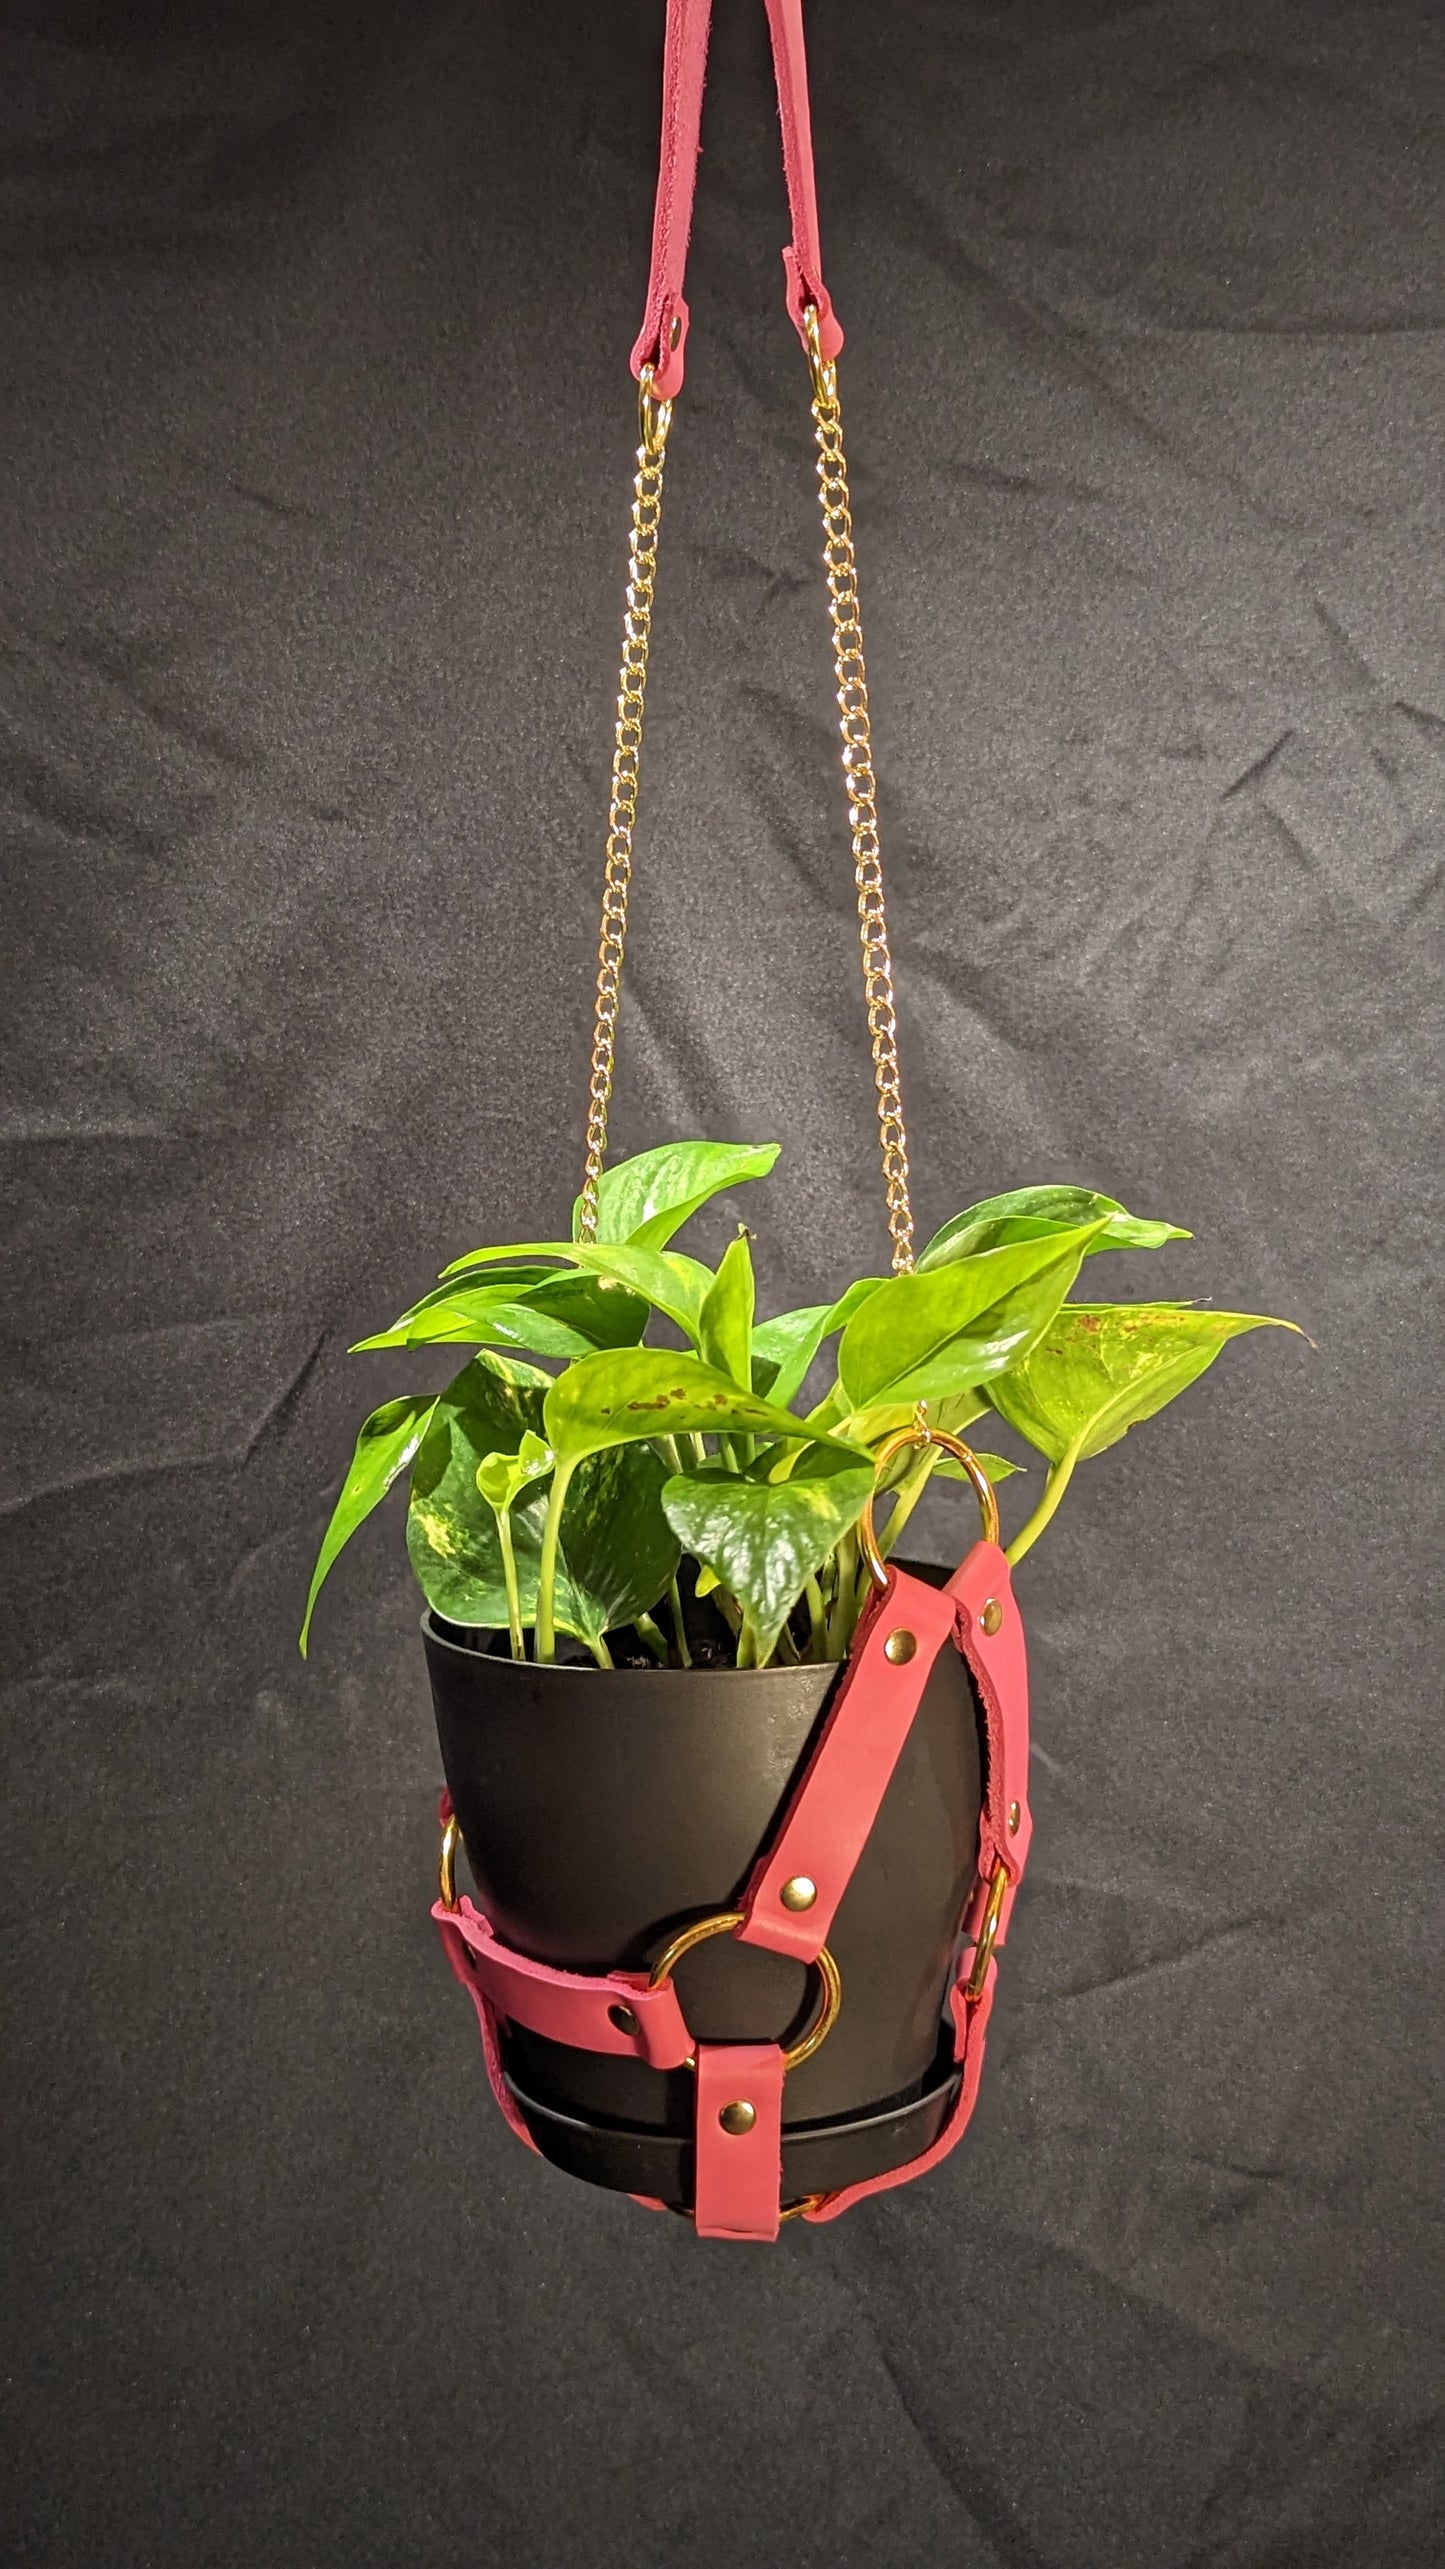 Pink leather plant hanger with gold hardware and chain. It is holding a 6" black plant pot with a golden pothos plant.